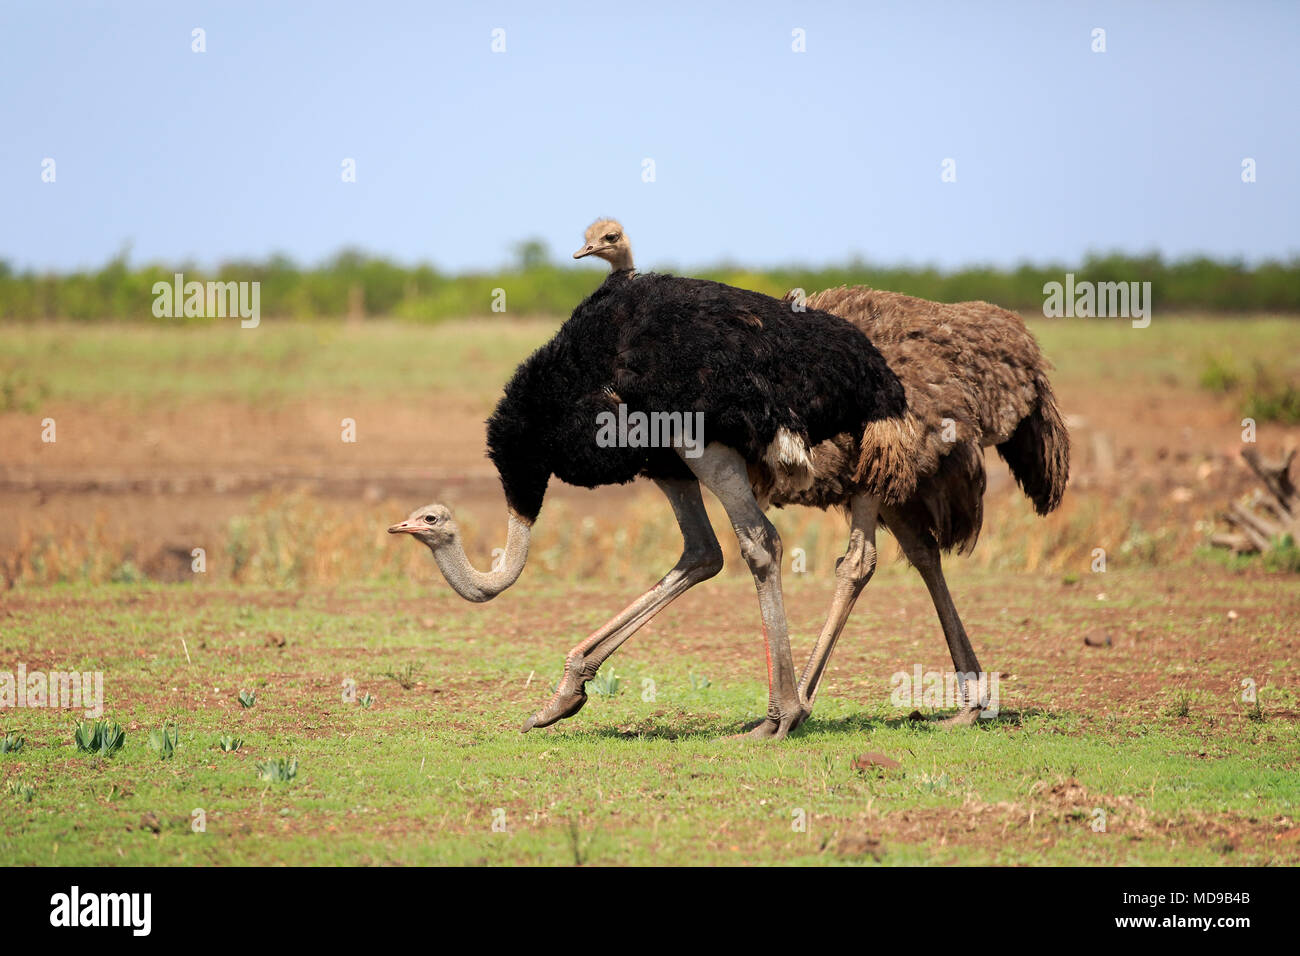 Funny South African struzzi (Struthio camelus australis), Adulto, animale coppia, acceso, Kruger National Park, Sud Africa Foto Stock